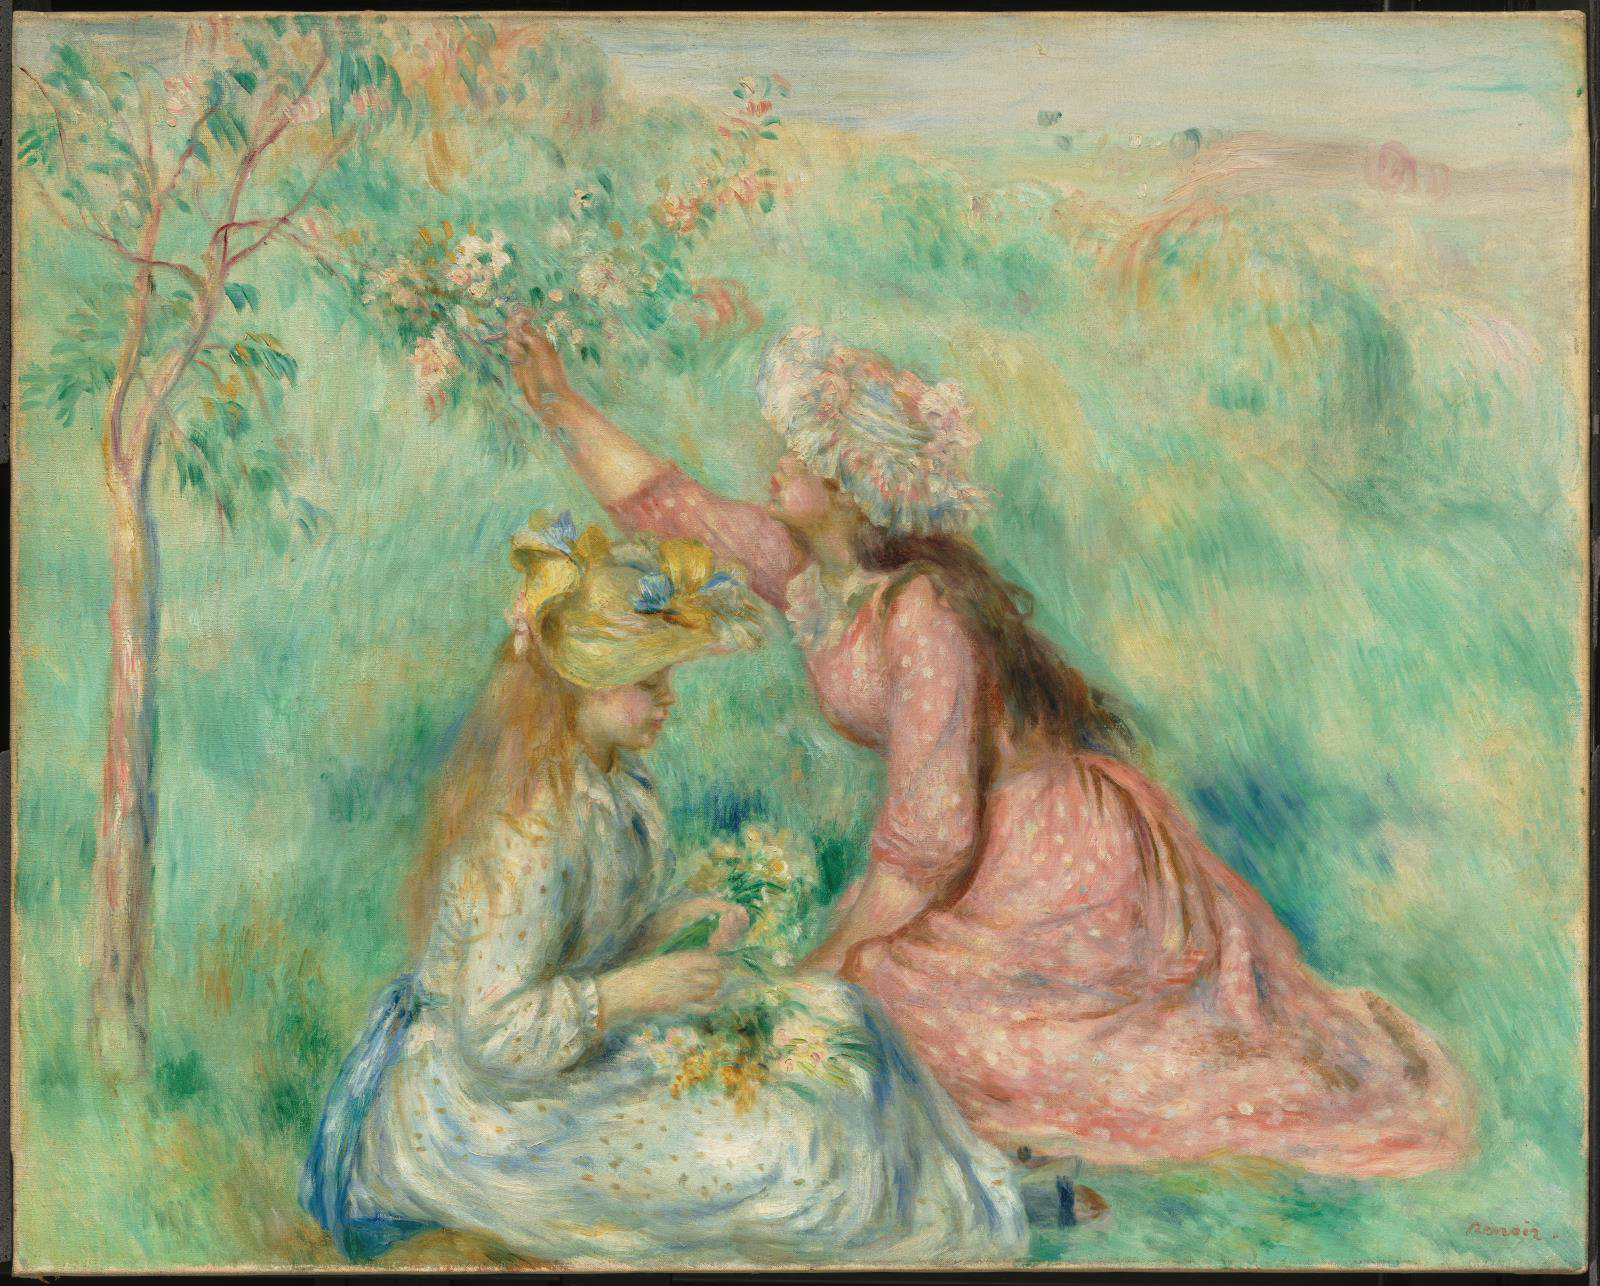 A painting depicting two young women in a grass meadow. One sits with a light a blue dress fiddling with a set of flowers. The other wears a pink dress and reaches out to pick flowers off a small tree. They both wear hats decorated with flowers.